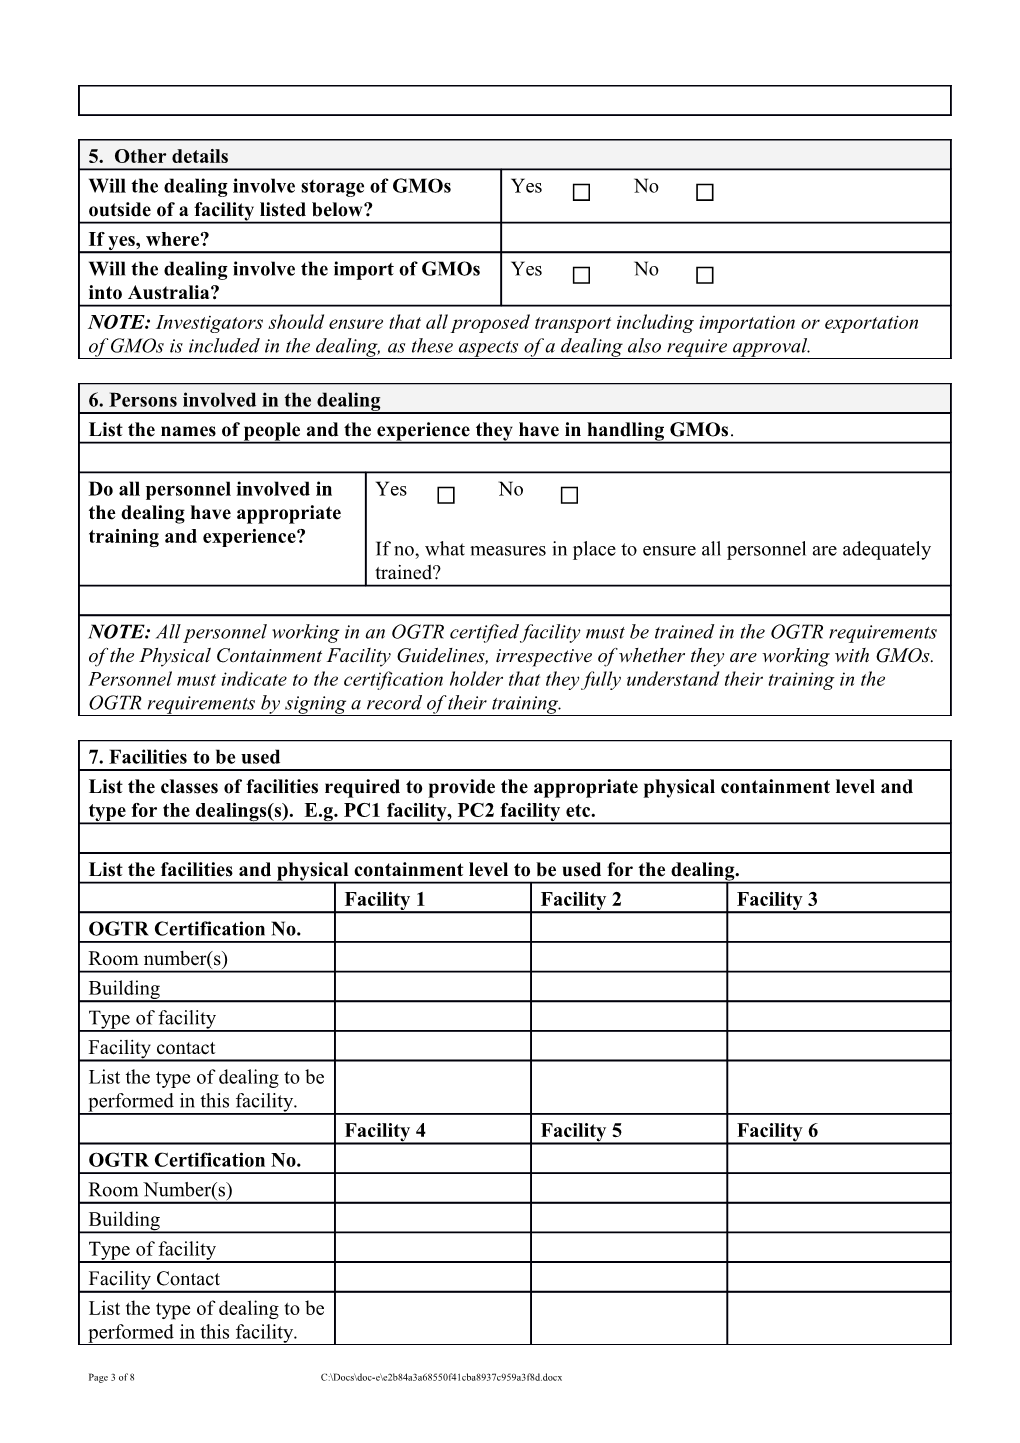 This Application Form Should Be Completed for All Notifiable Low Risk Category GMO Dealingsto